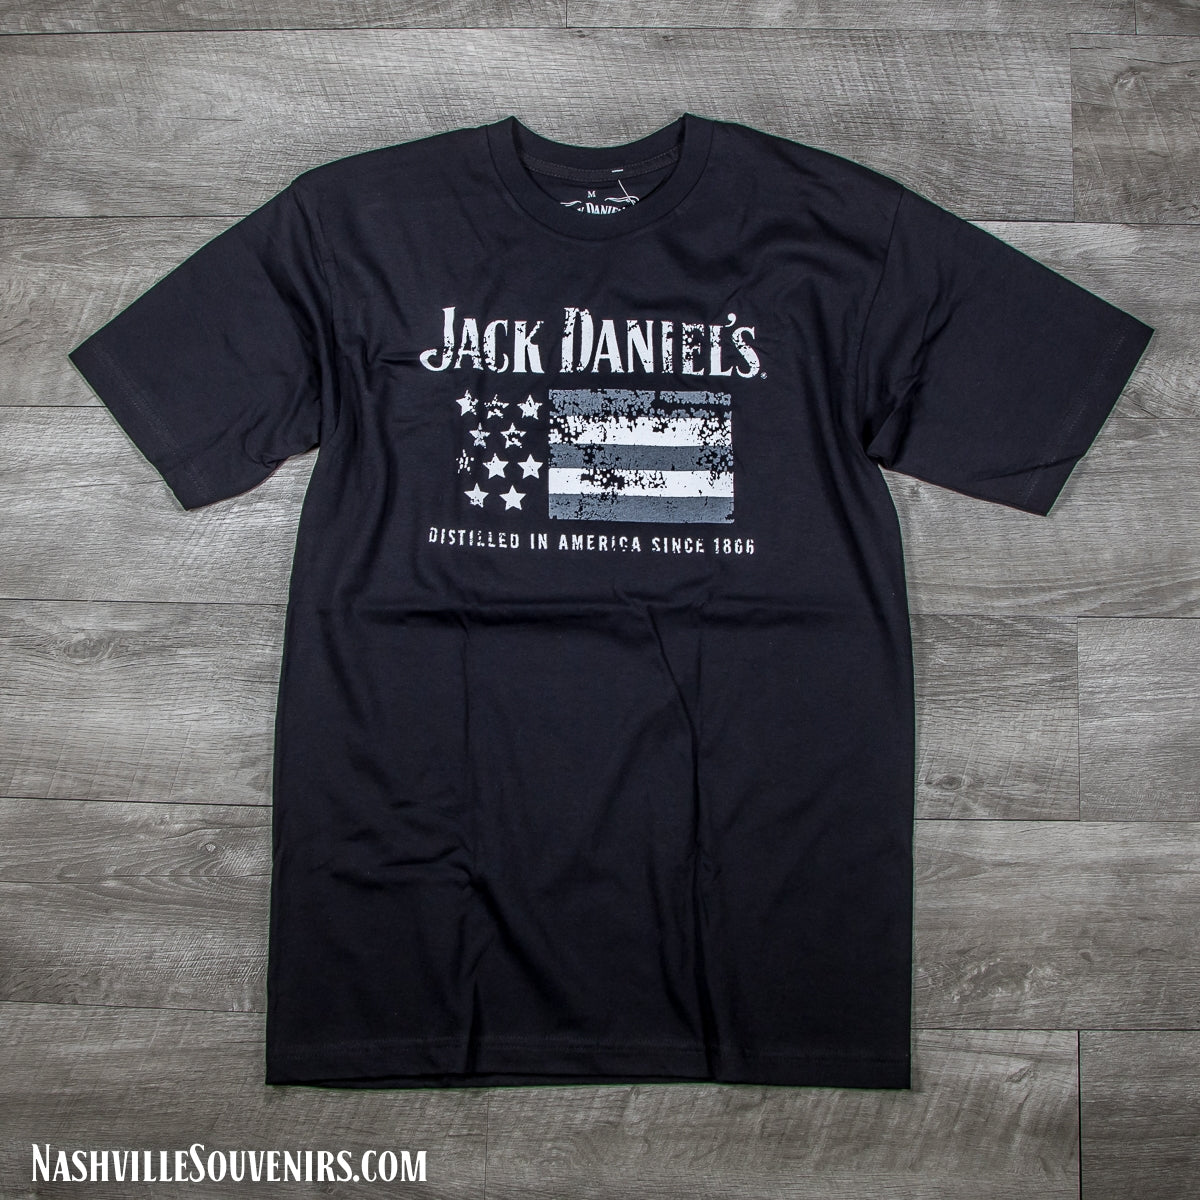 Officially licensed Jack Daniels Weathered Flag T-Shirt that reads, Distilled in America since 1866. Get yours today with FREE SHIPPING on all US orders over $75!